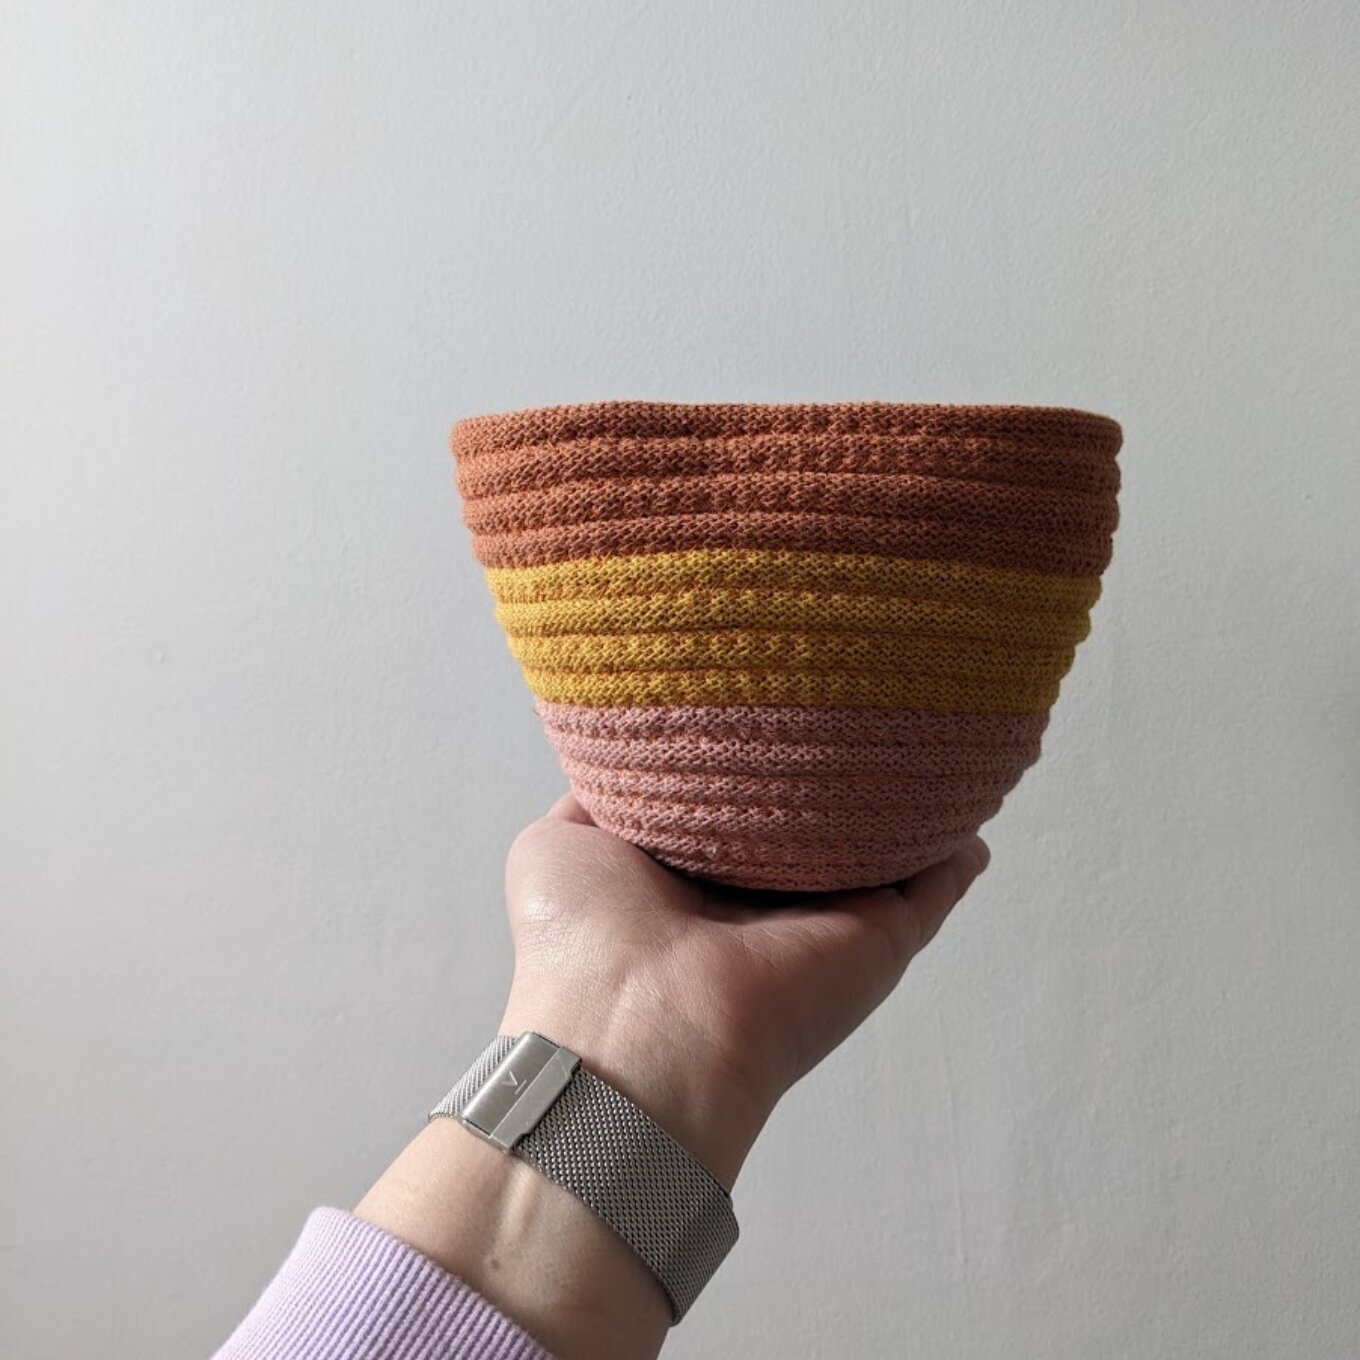 Rope vessel 100 recycled cotton